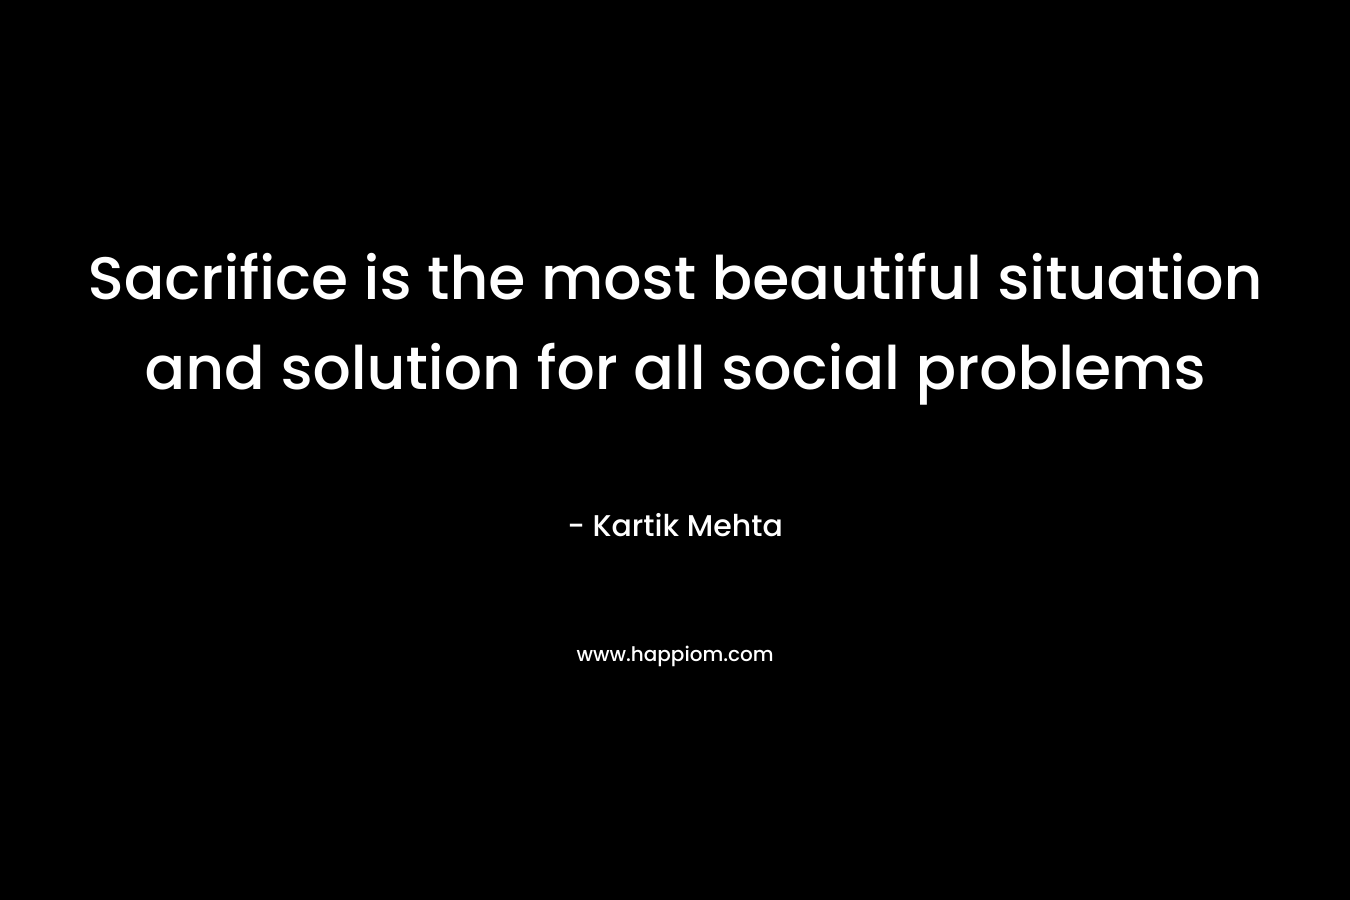 Sacrifice is the most beautiful situation and solution for all social problems – Kartik Mehta